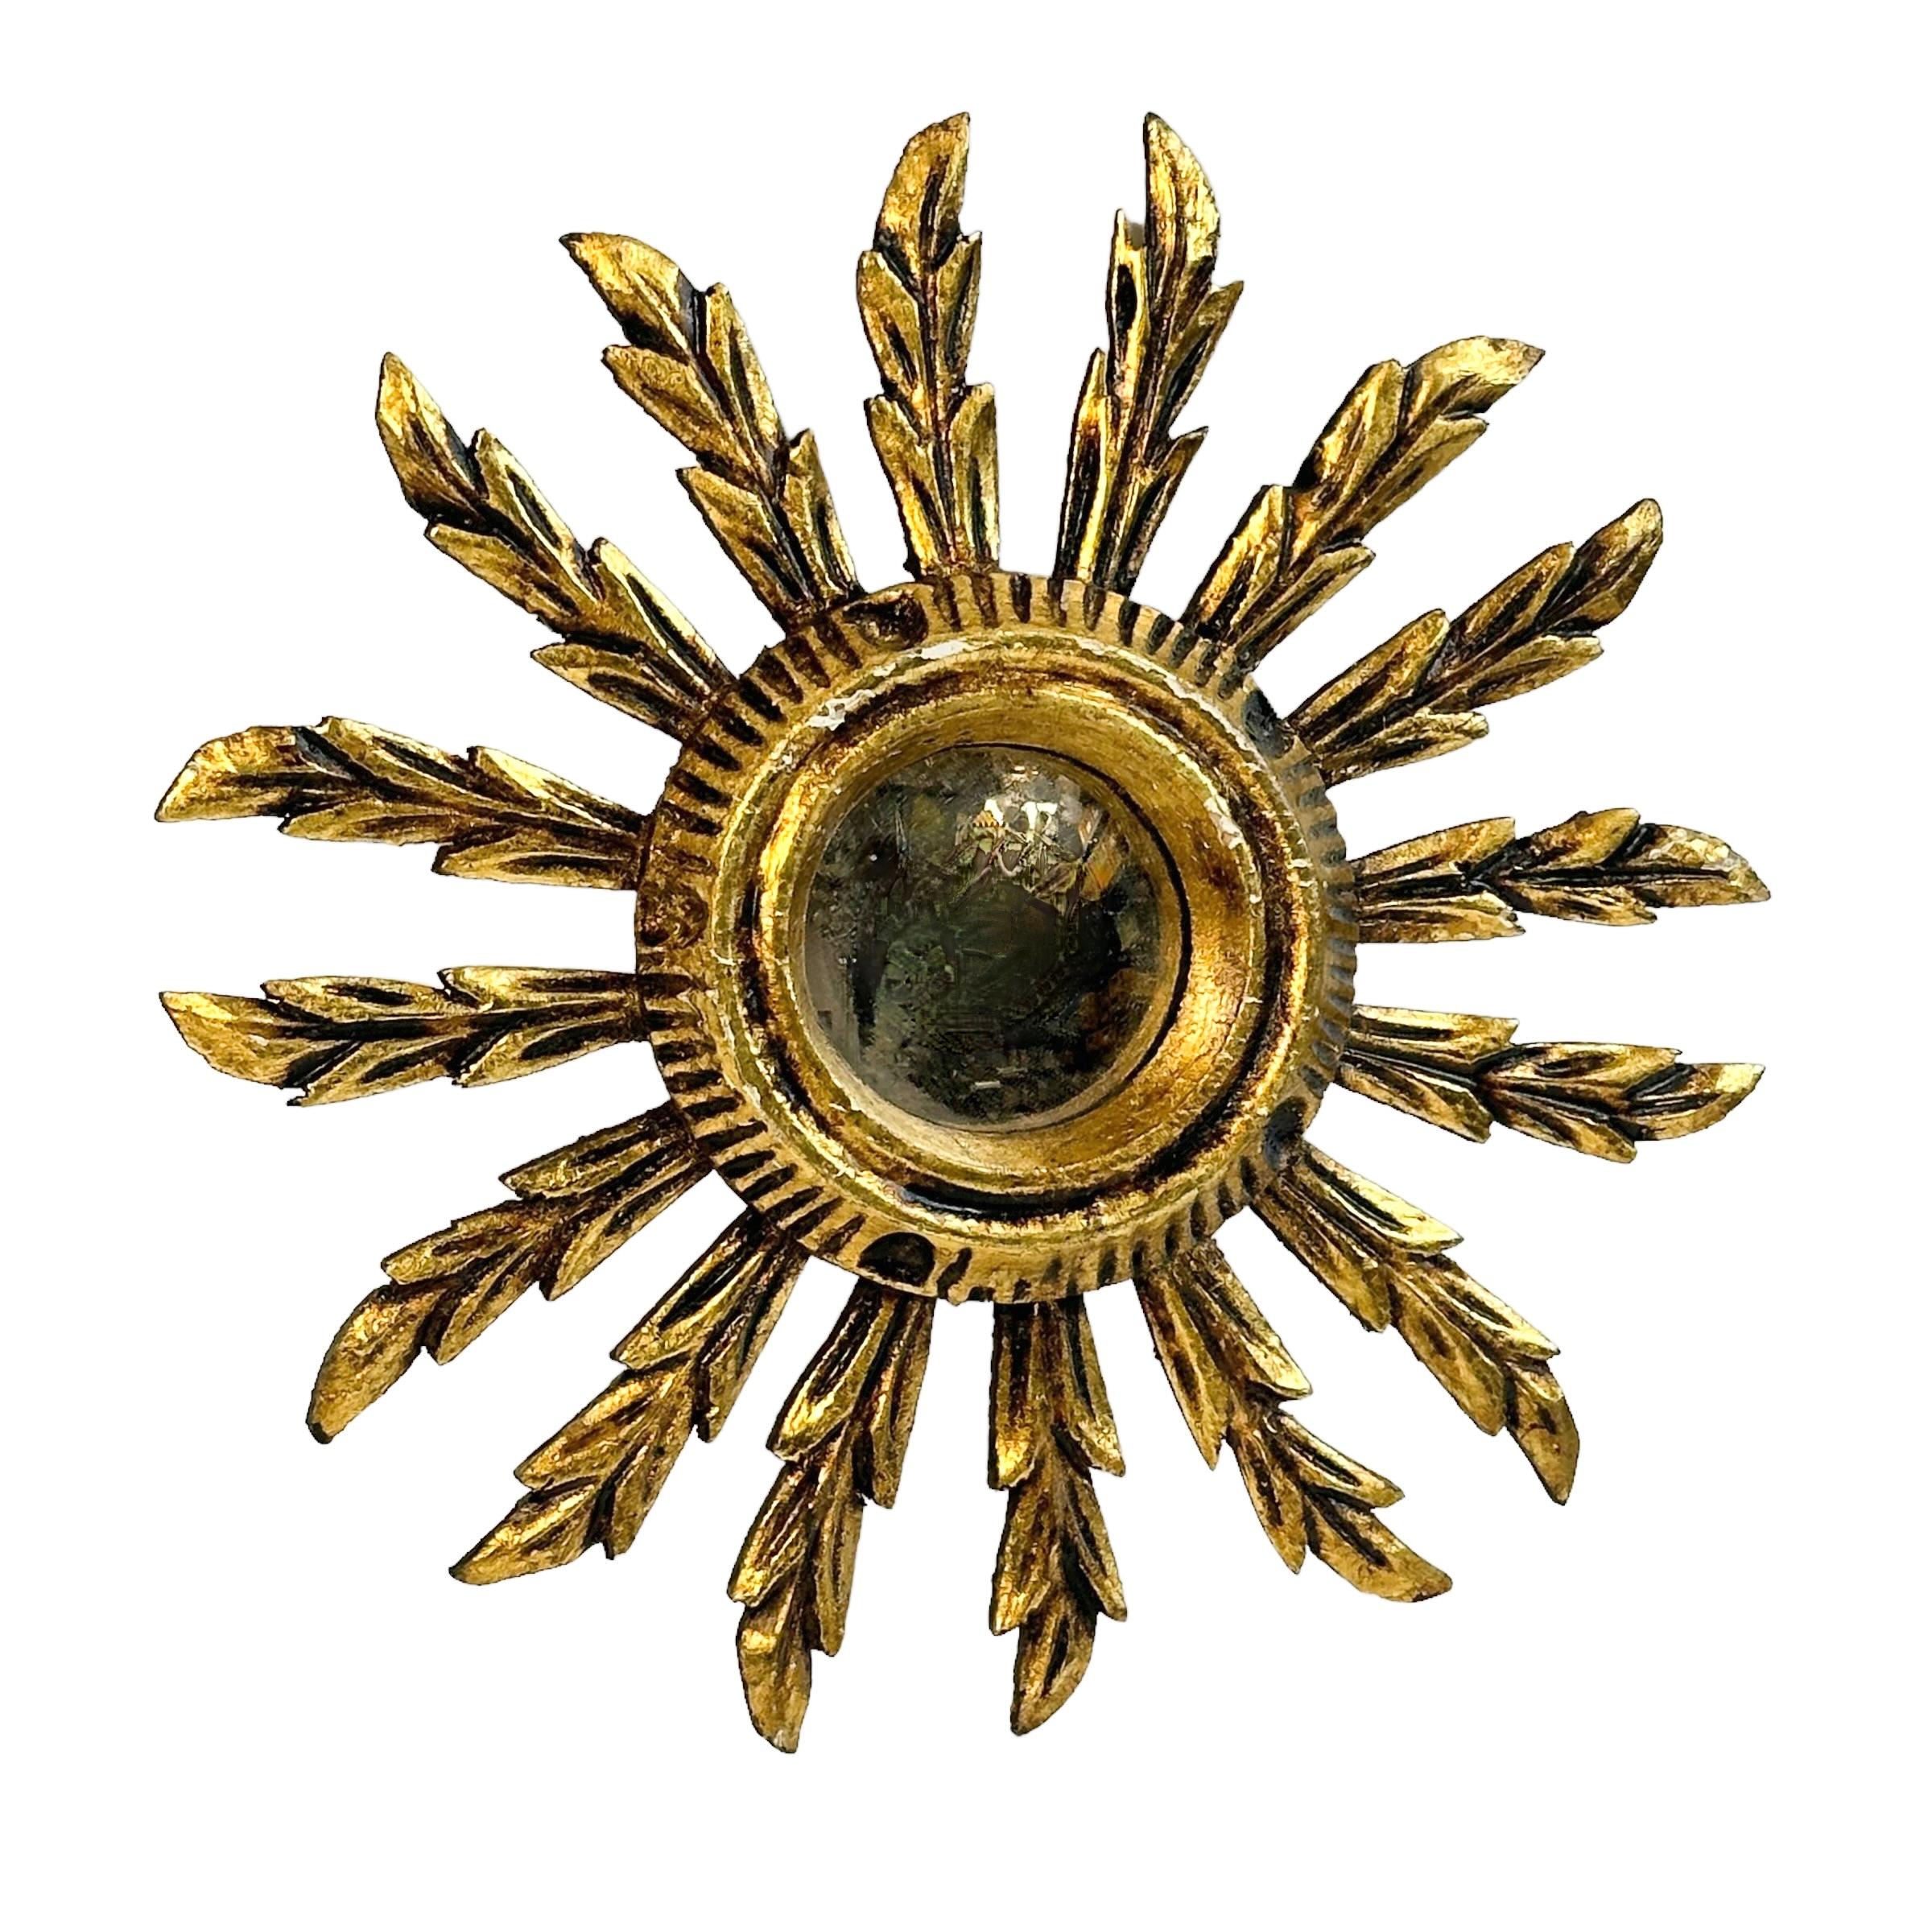 A gorgeous starburst sunburst convex mirror. Made of gilded wood. No chips, no cracks, no repairs. It measures approximate: 11.13